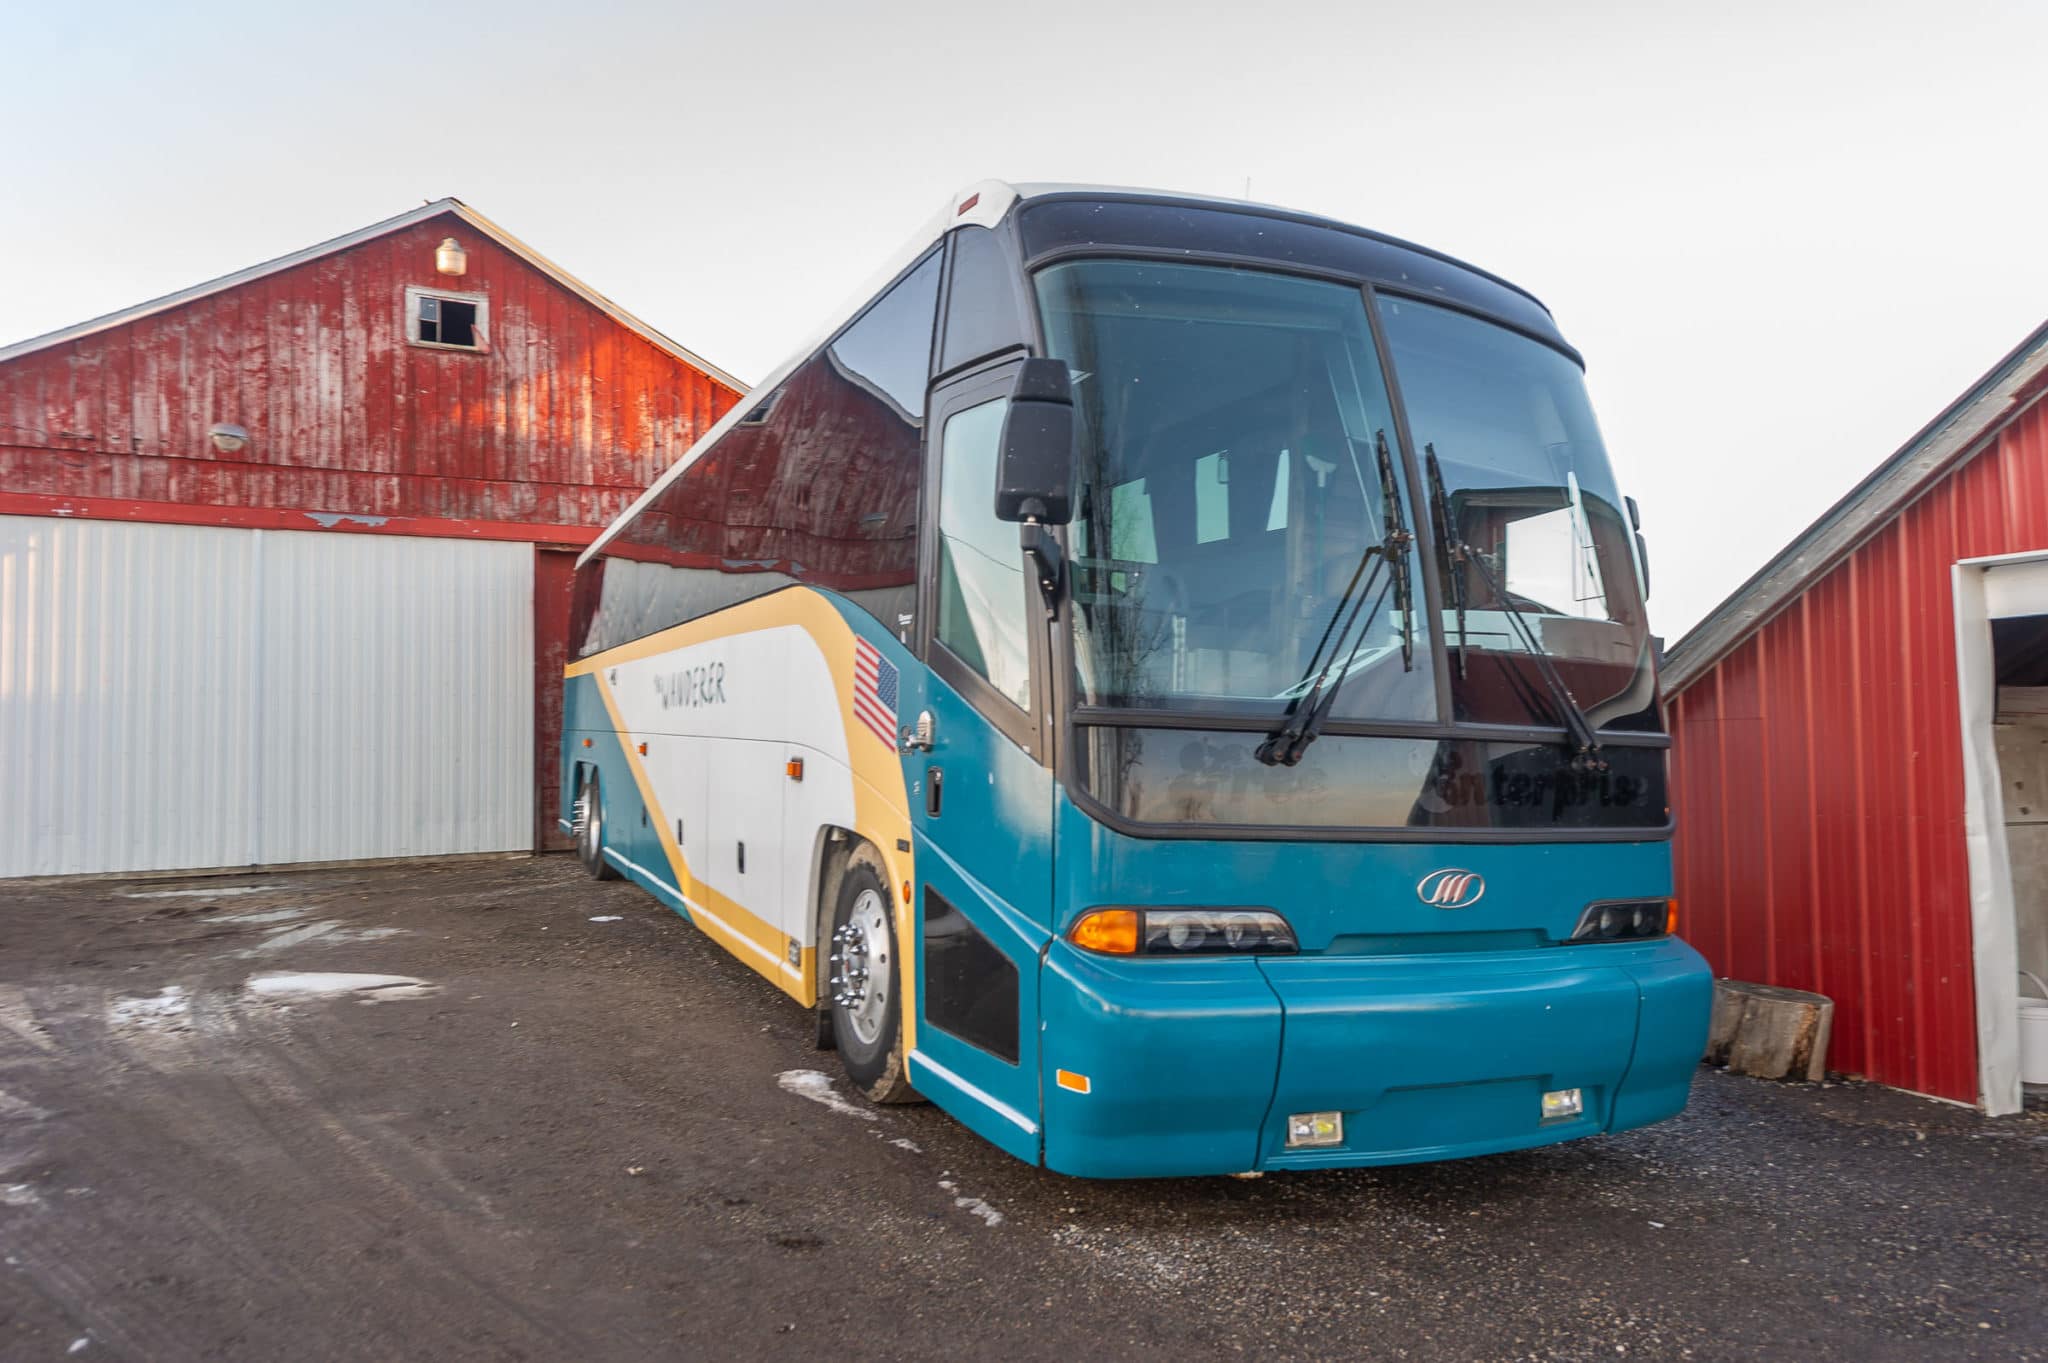 This Beautiful Coach Bus RV Has a Basement Bedroom and a Full Kitchen